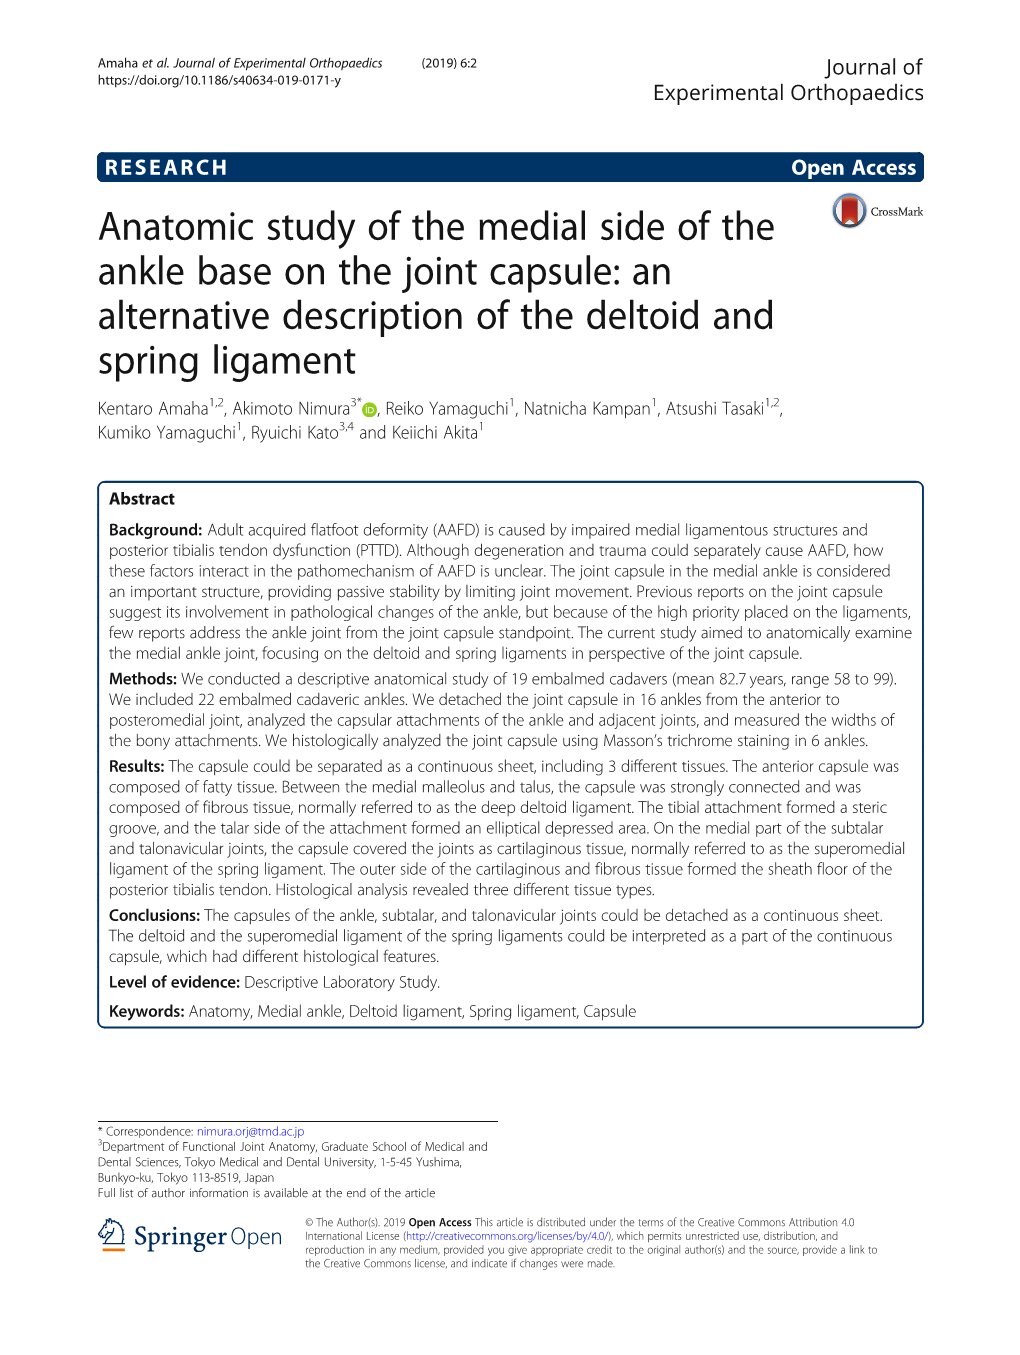 Anatomic Study of the Medial Side